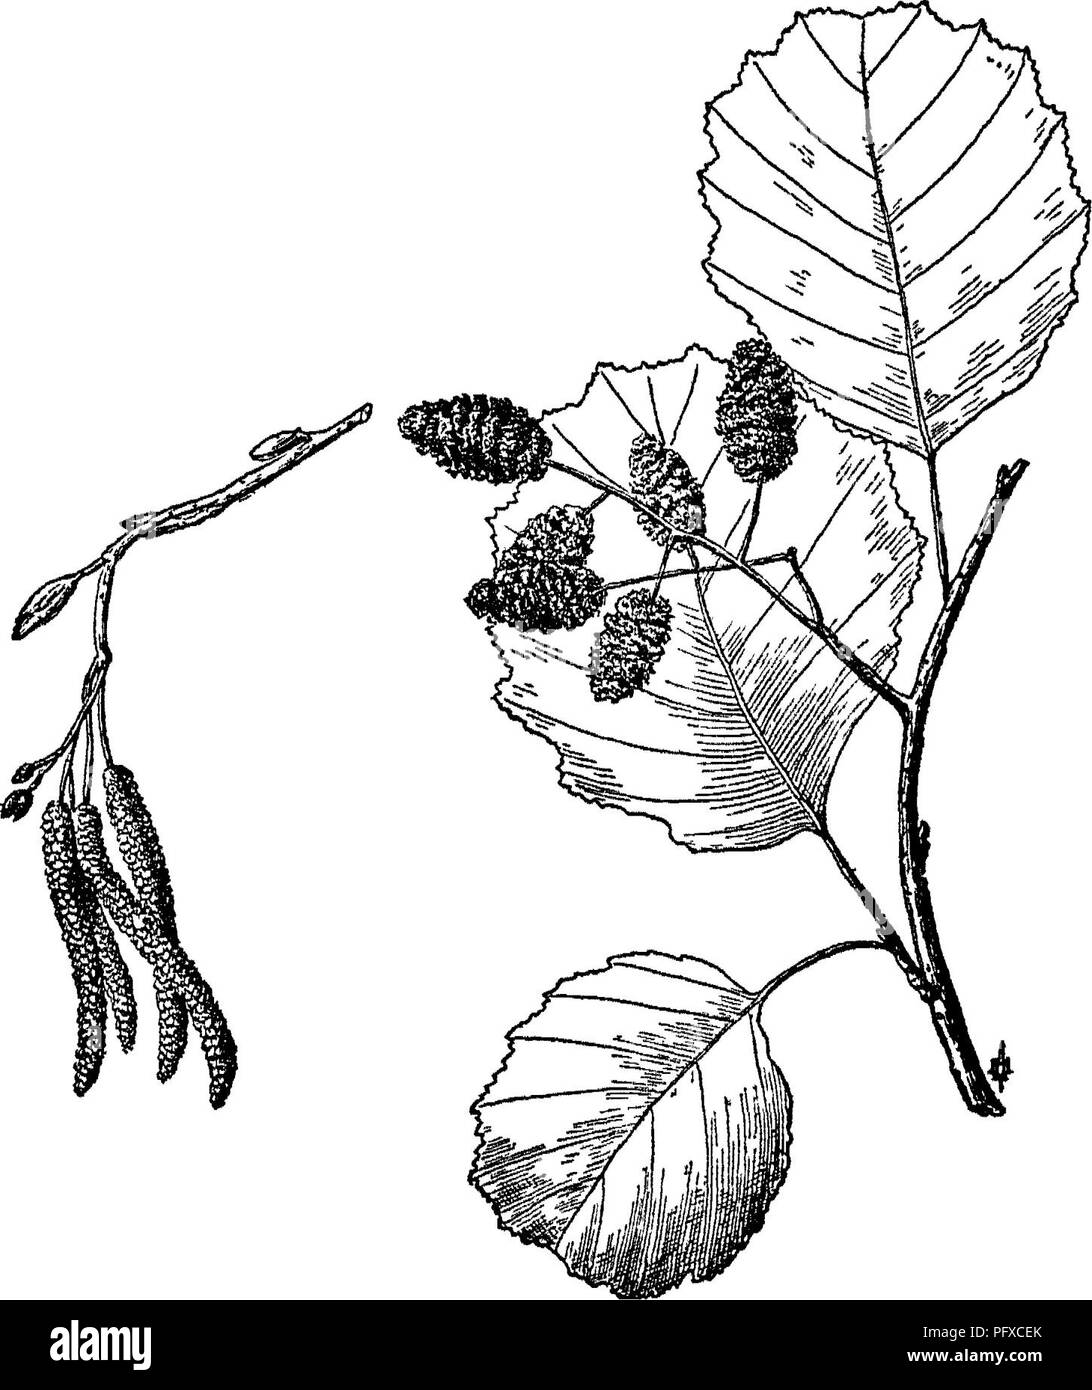 . The care of trees in lawn, street and park, with a list of trees and shrubs for decorative use. Trees; Trees. Alders and Shadbush 273. Fig. 95. — Black Alder. Alnus glutiriosa Gaertn. The native species, six in number, are mostly shrubs or shrub-like trees, useful for grouping on rocky sites and along watercourses, so far but little utilized; among them, A. rugosa K. Koch. (159) (ser- rulata); A. incana Willd. (160), with brown and white dotted branches; A. viridis D. C. (161), our commonest native shrubs; A. maritima Muhl. (162), with shining foliage and attractive by the development of mal Stock Photo